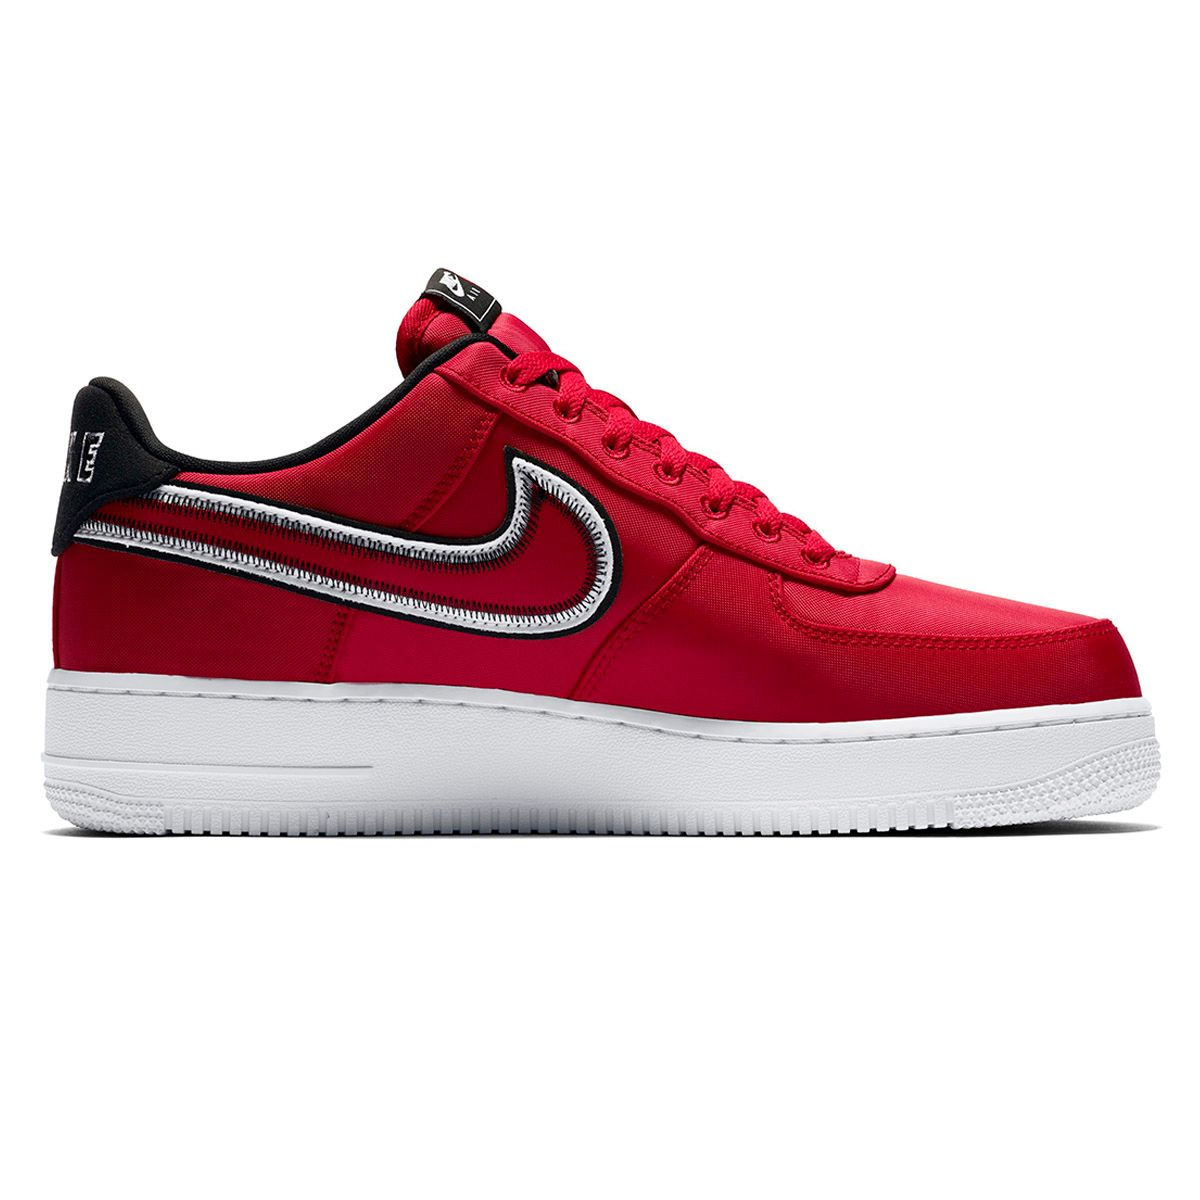 Courageous George Bernard Reject Nike Air Force Rojas Fast Delivery, 69% OFF | crqquimica.com.br